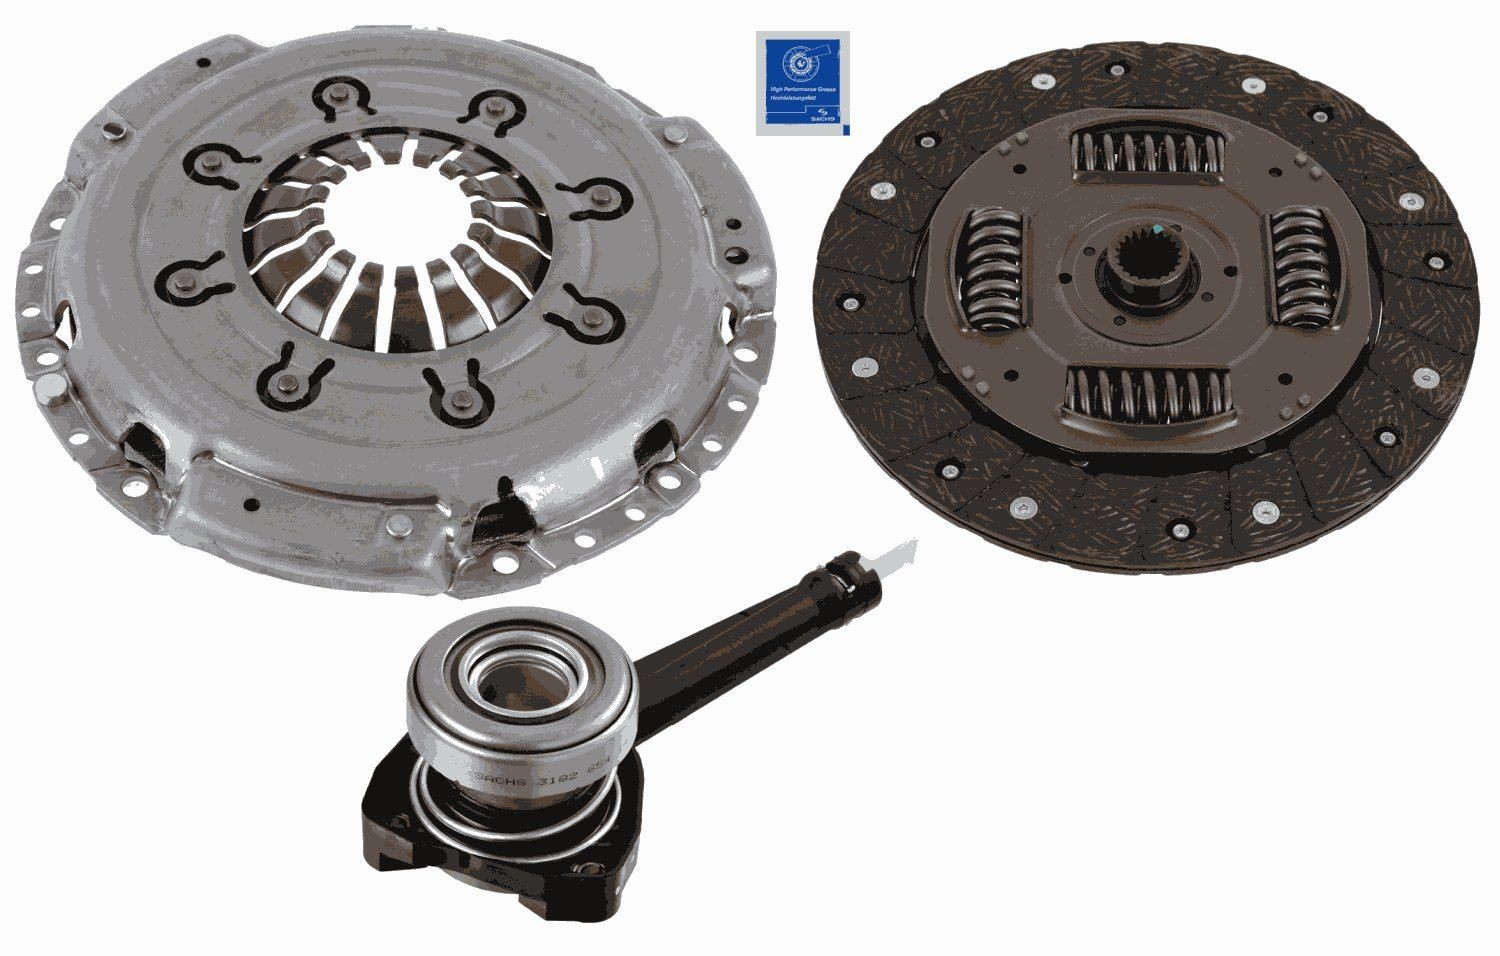 Original SACHS Clutch replacement kit 3000 990 382 for NISSAN TRADE